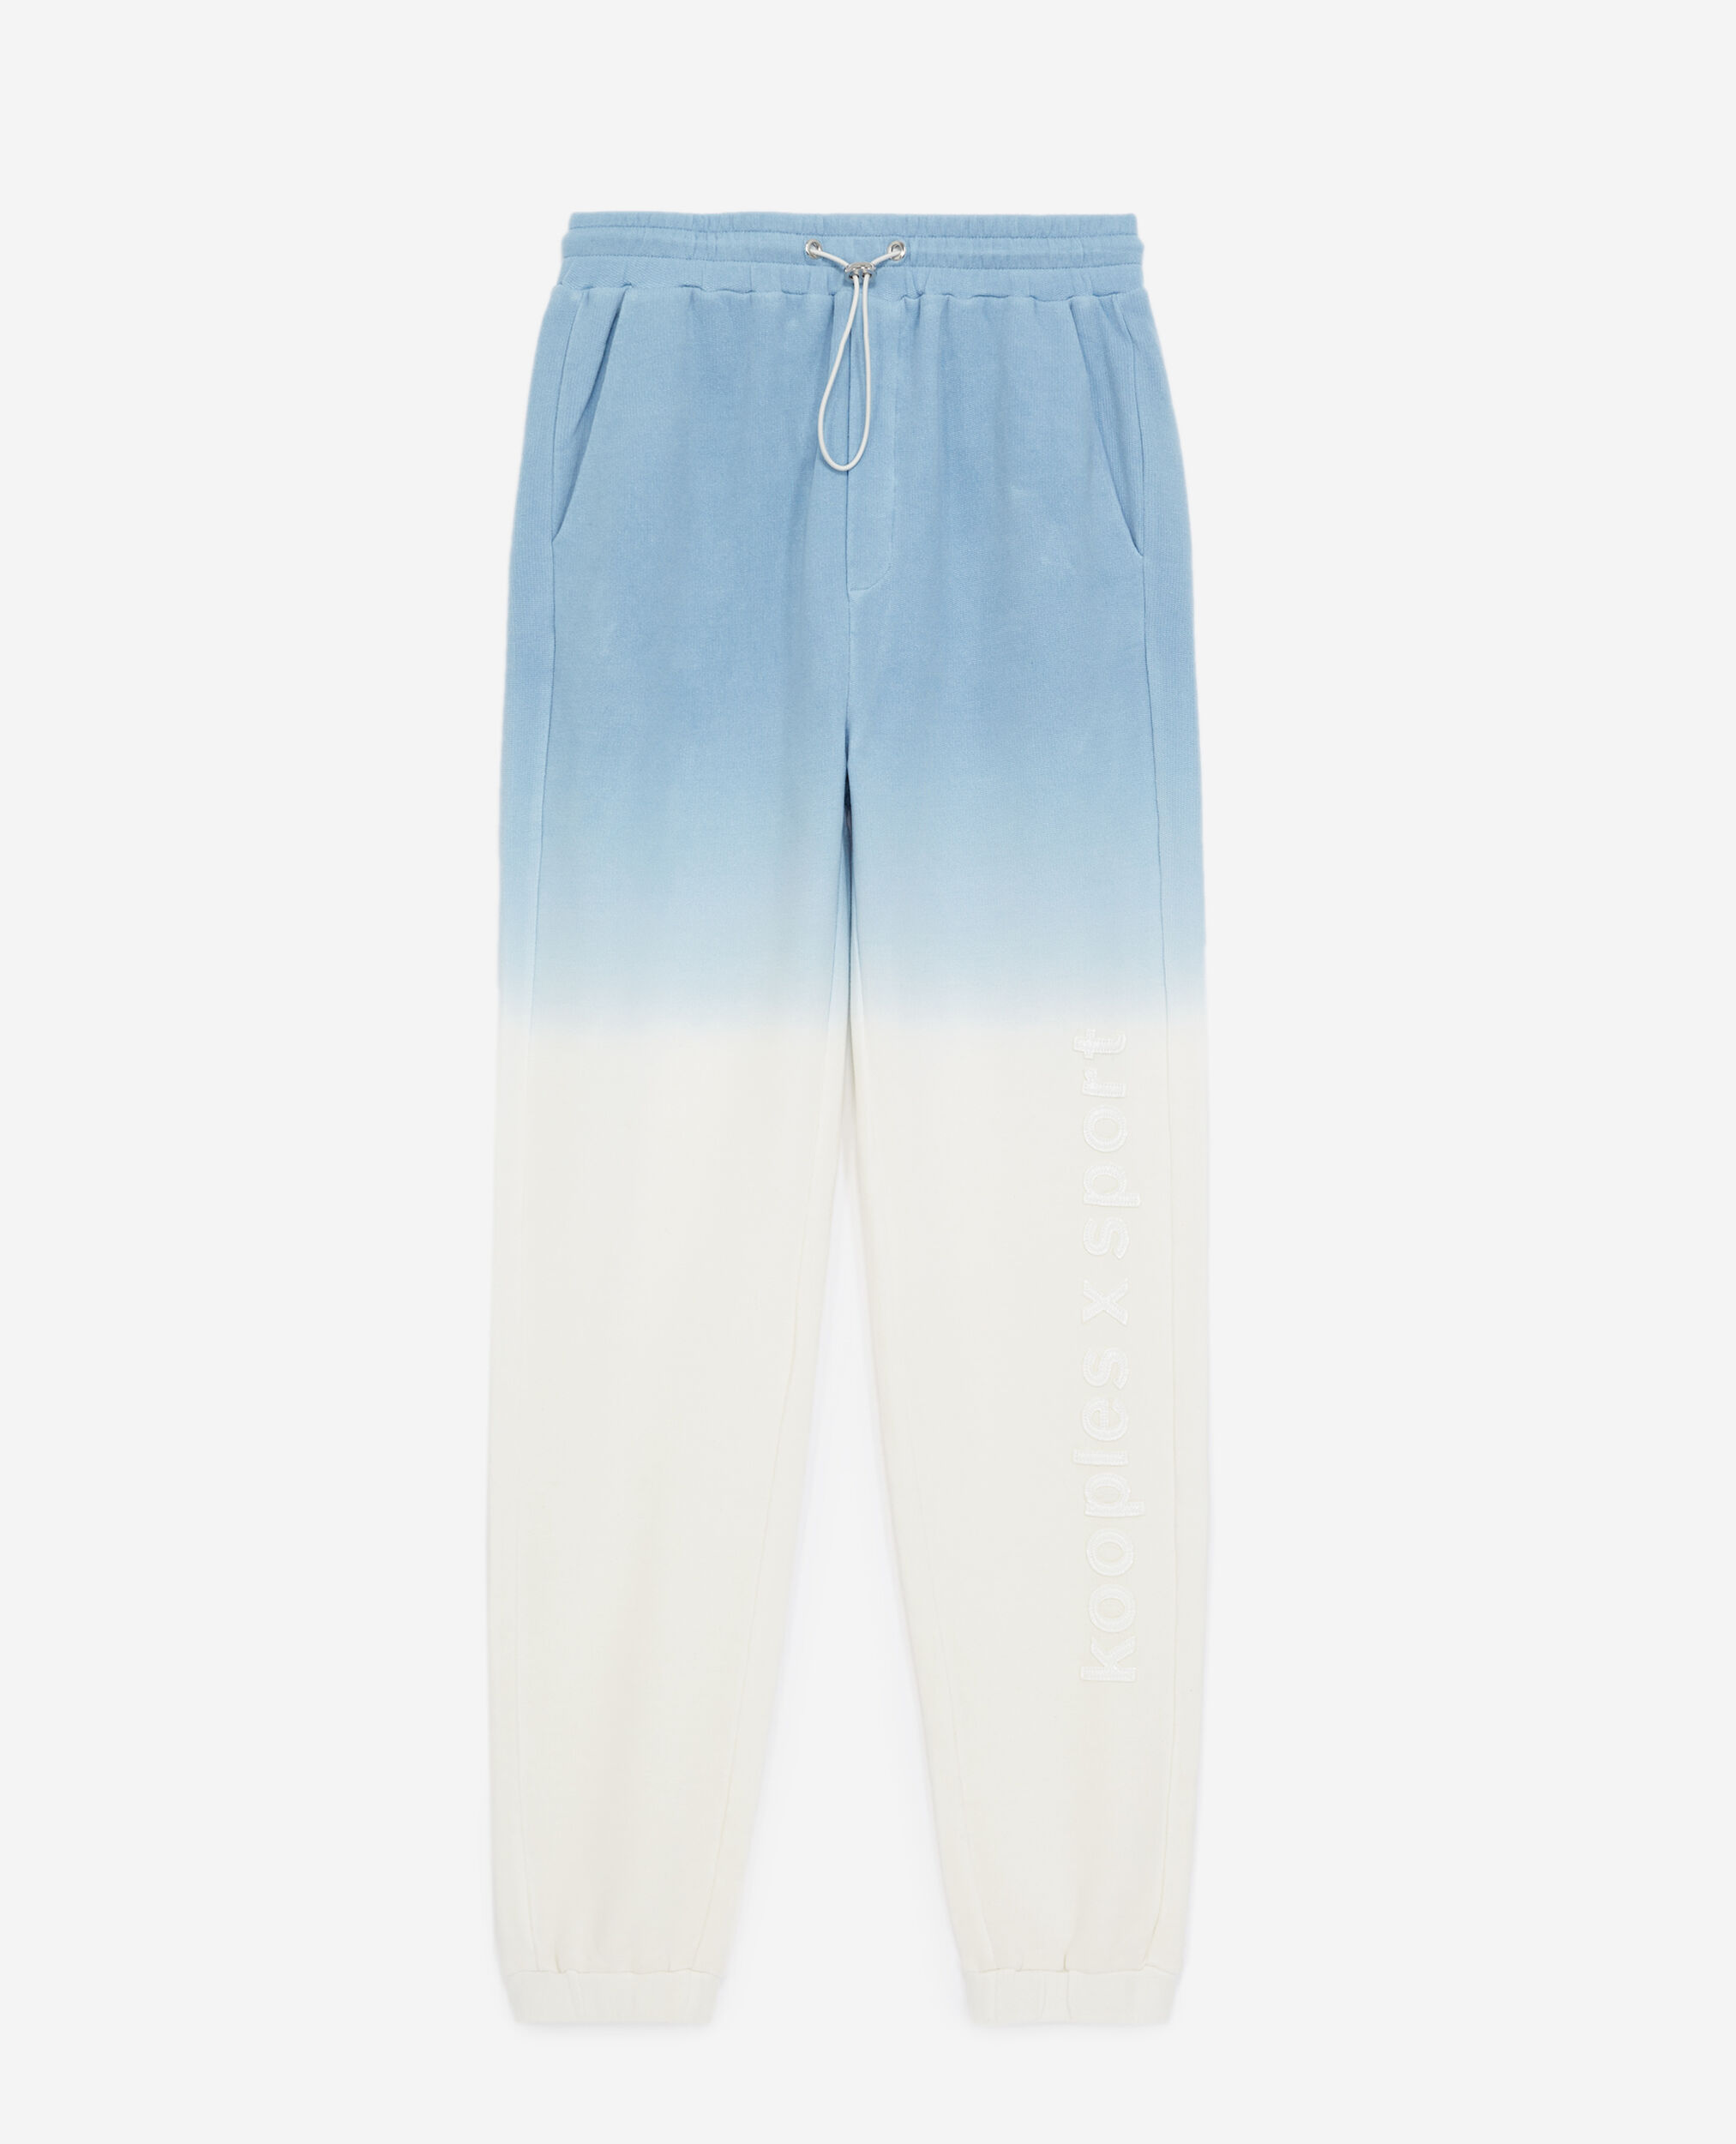 Blue and white joggers with tie-dye effect, BLUE WHITE, hi-res image number null